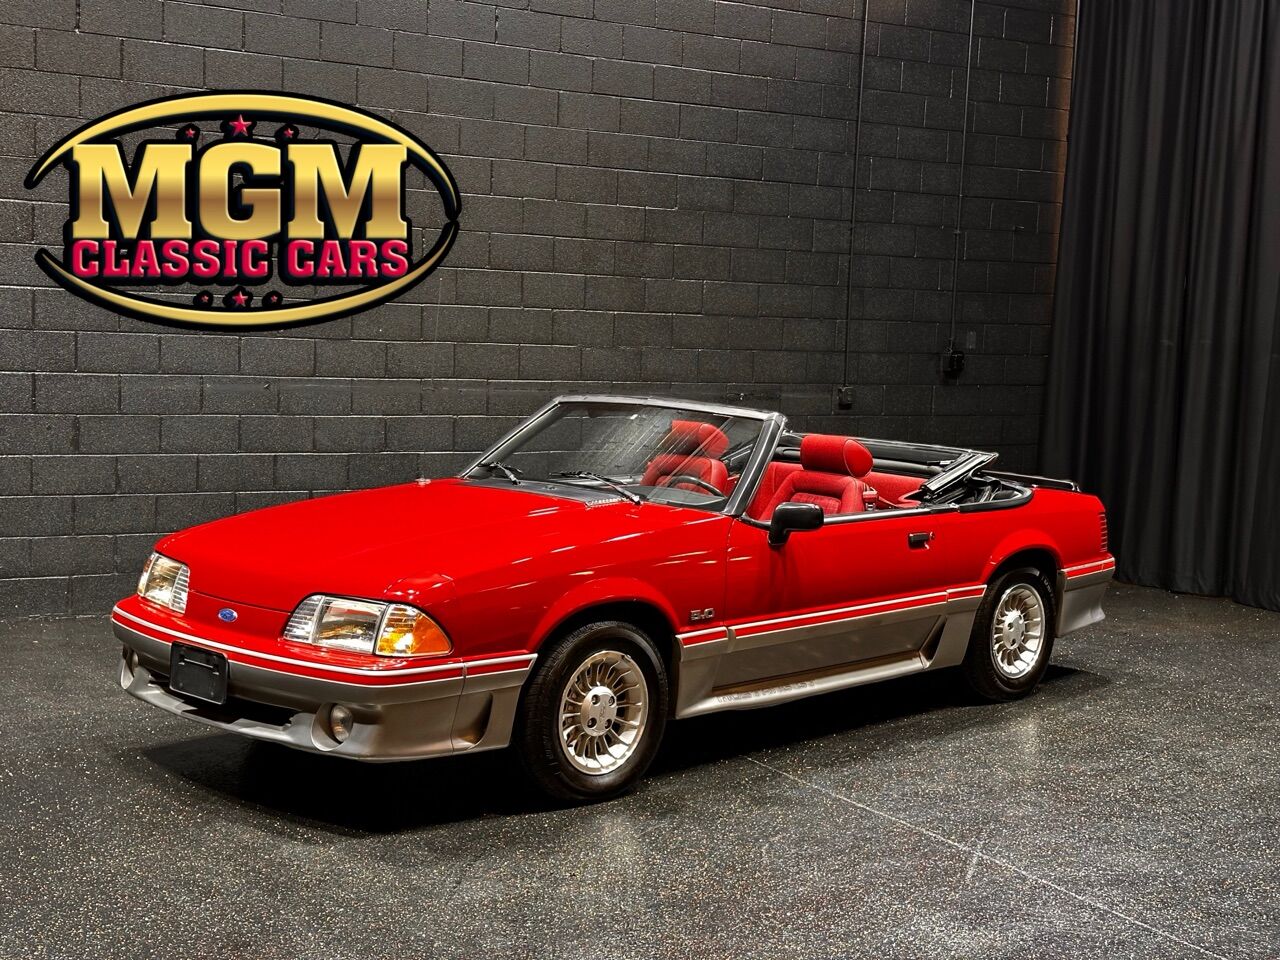 1988 Ford Mustang 1